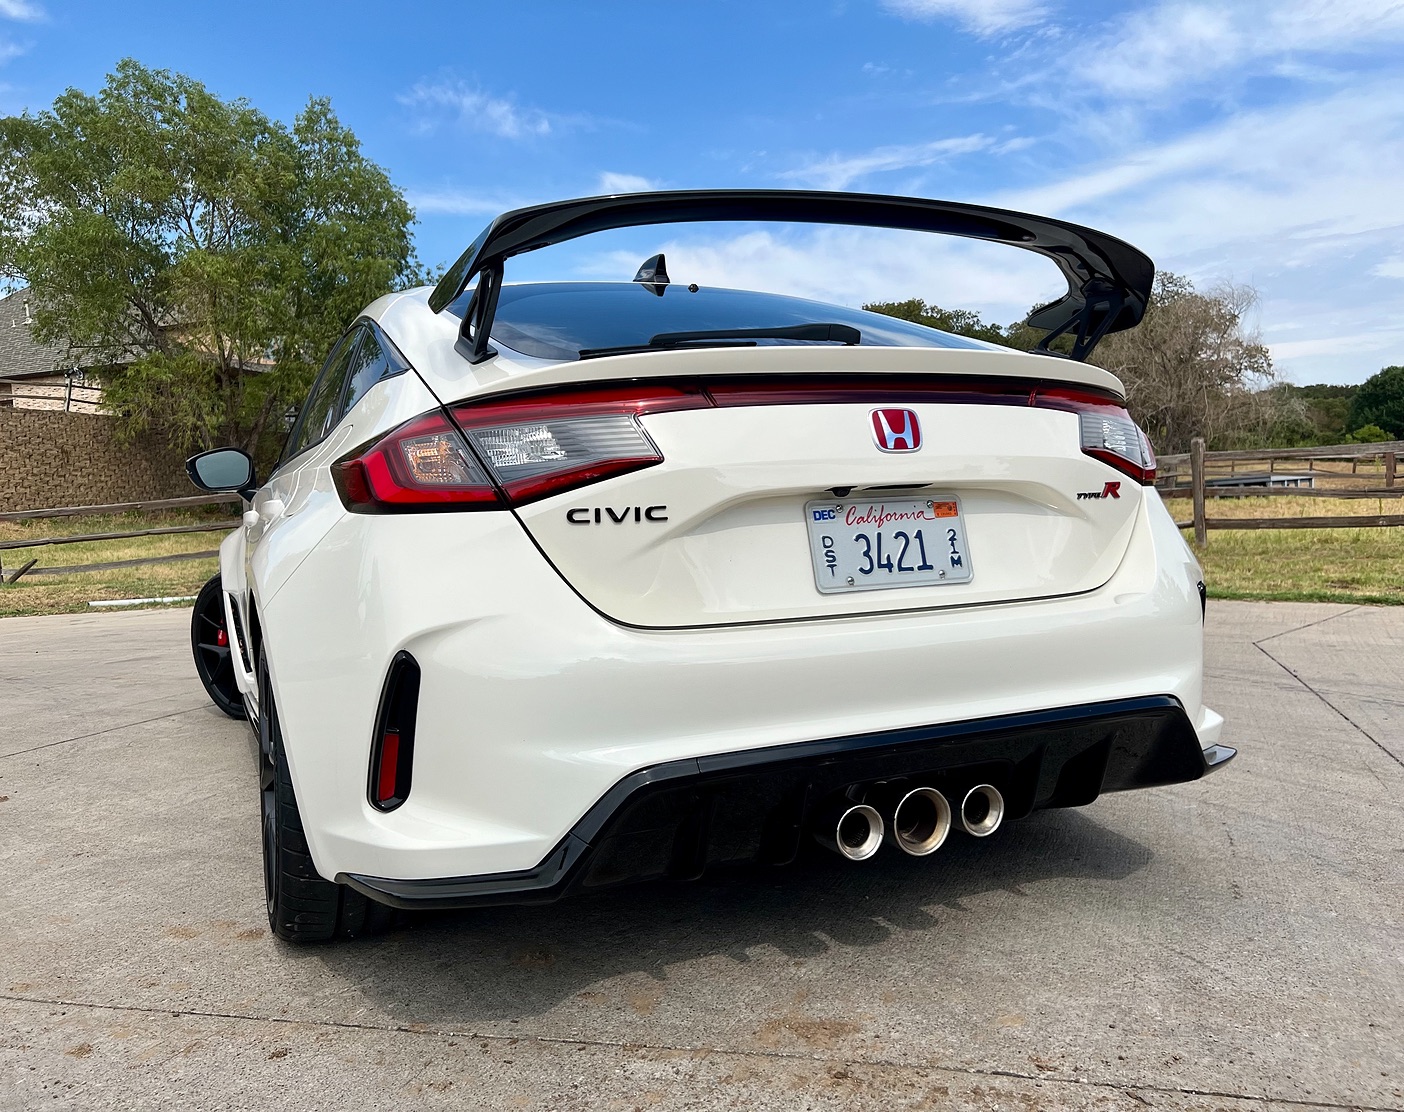 The 2023 Honda Civic Type R Review: A Hot Hatch of the Highest Order